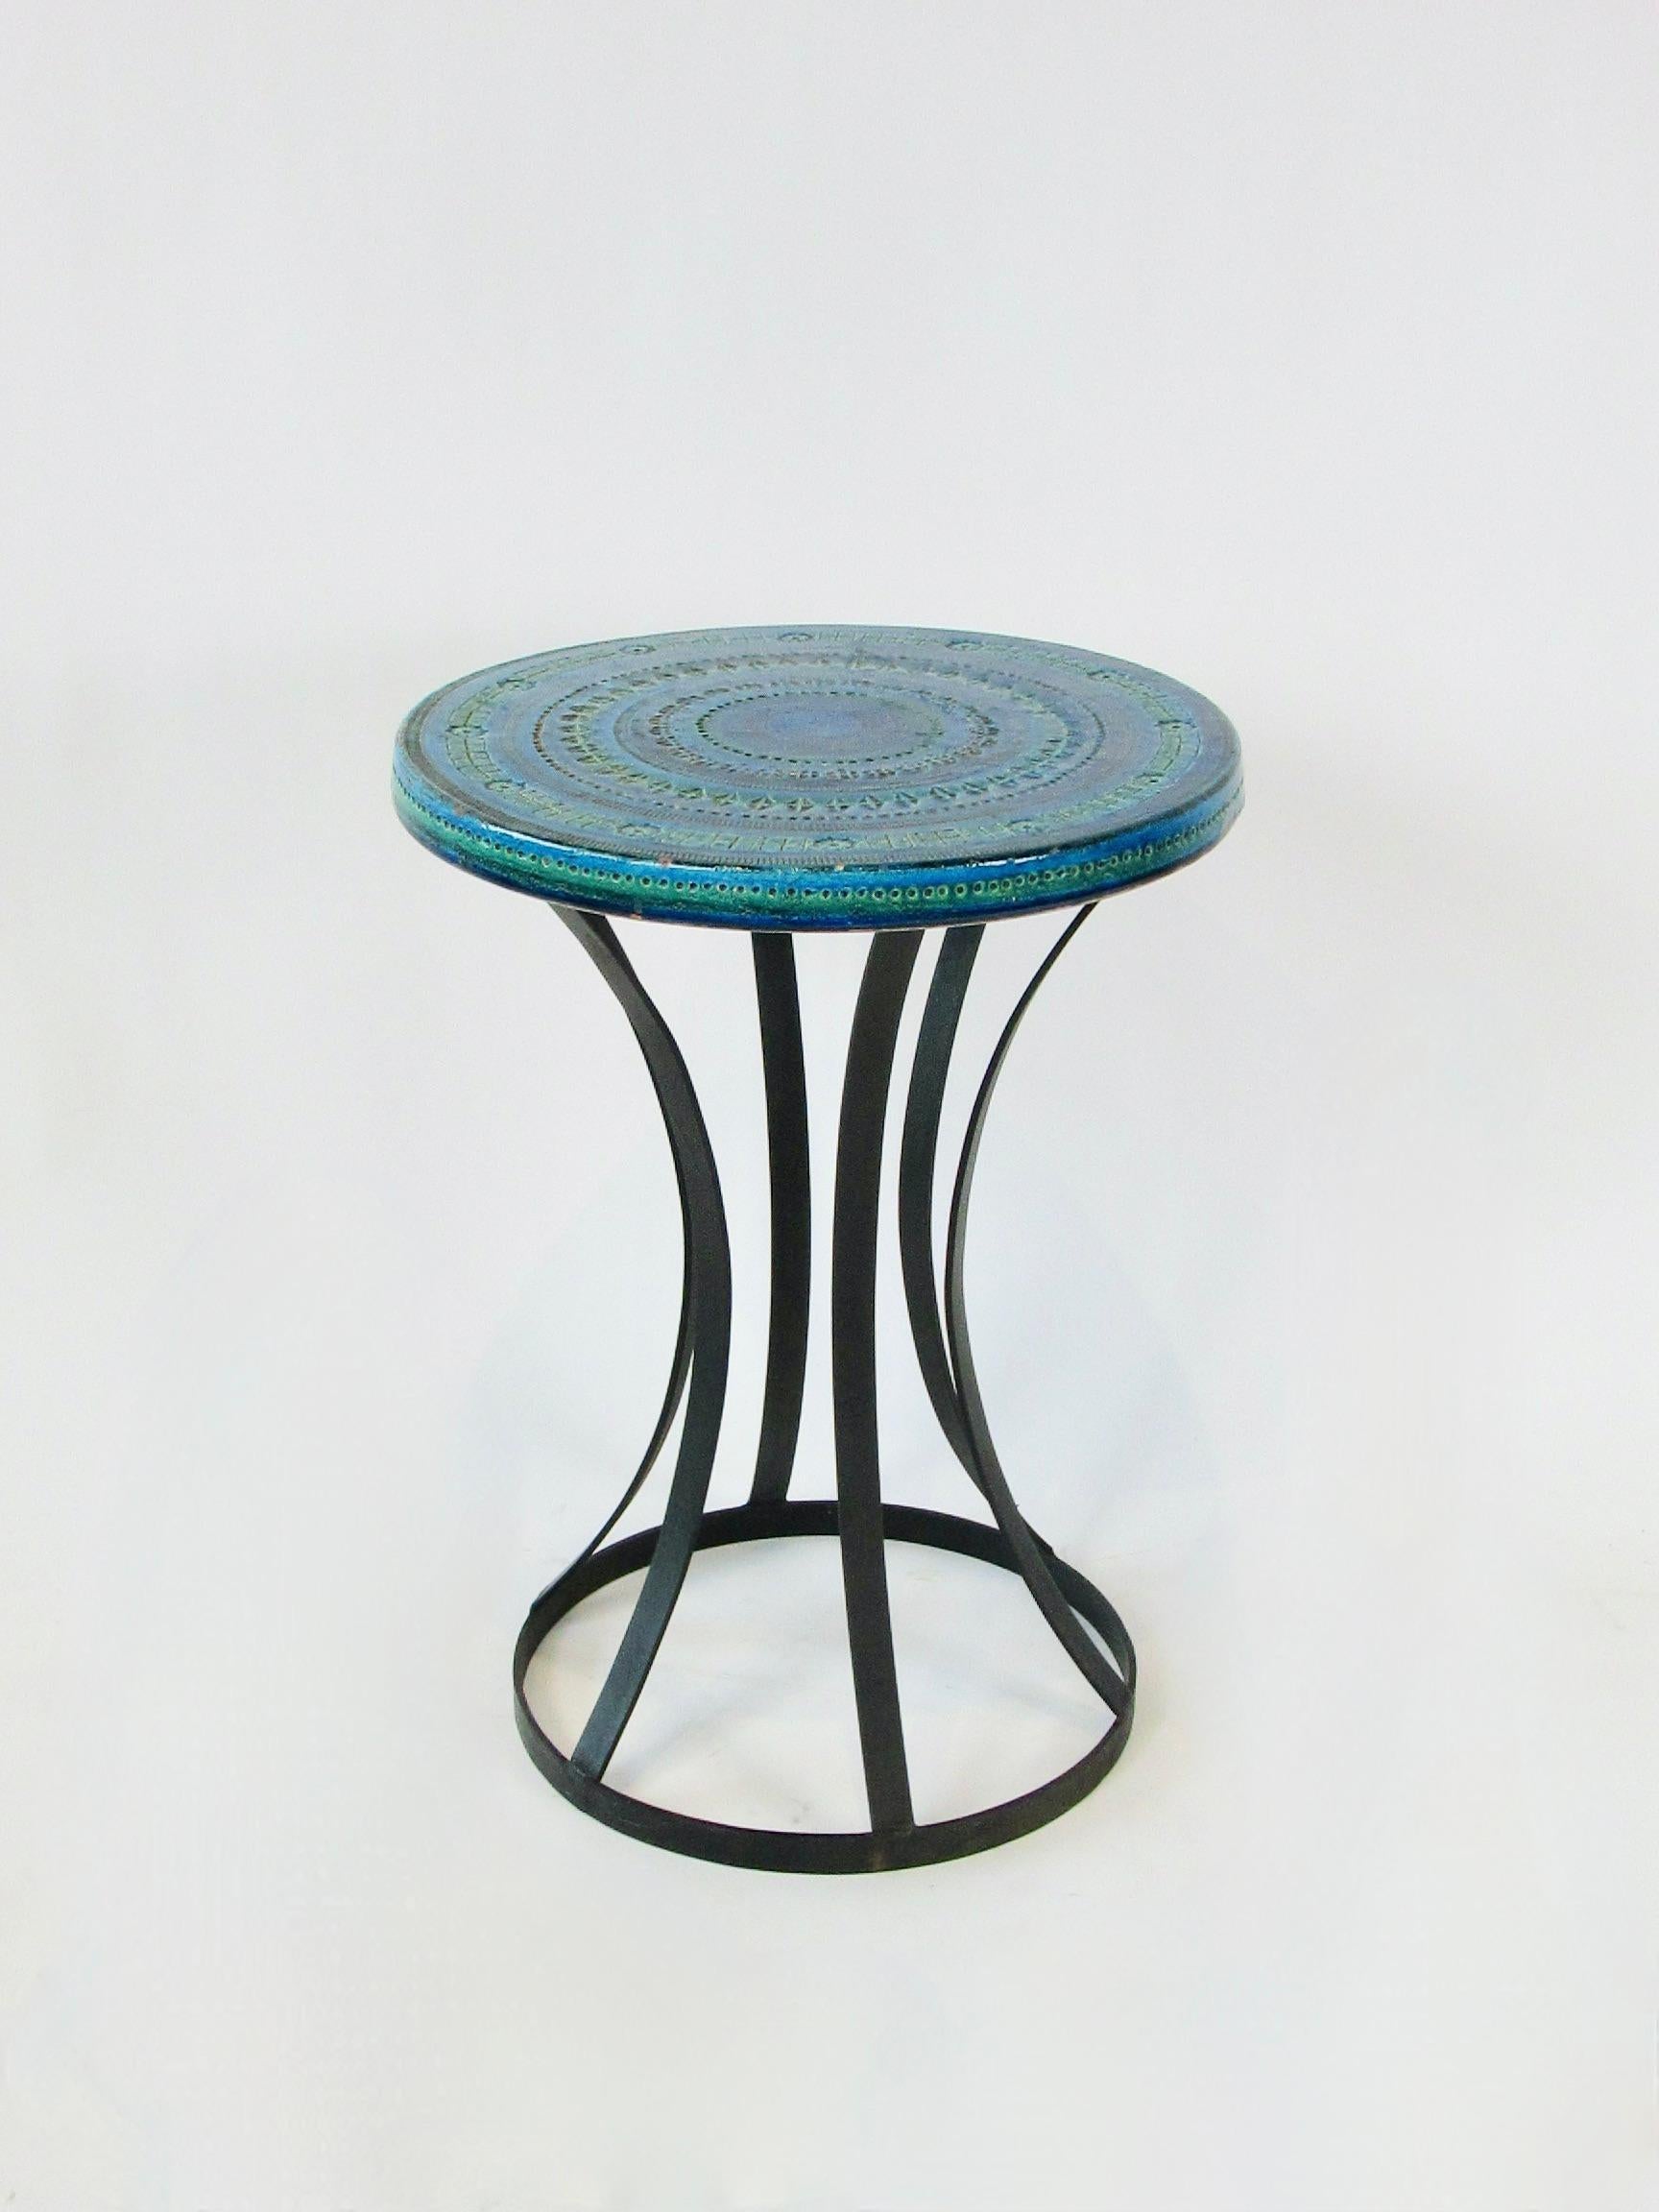 Blue Green Aldo Londi Bitossi for Raymor Pottery Table Top on Wrought Base In Good Condition For Sale In Ferndale, MI